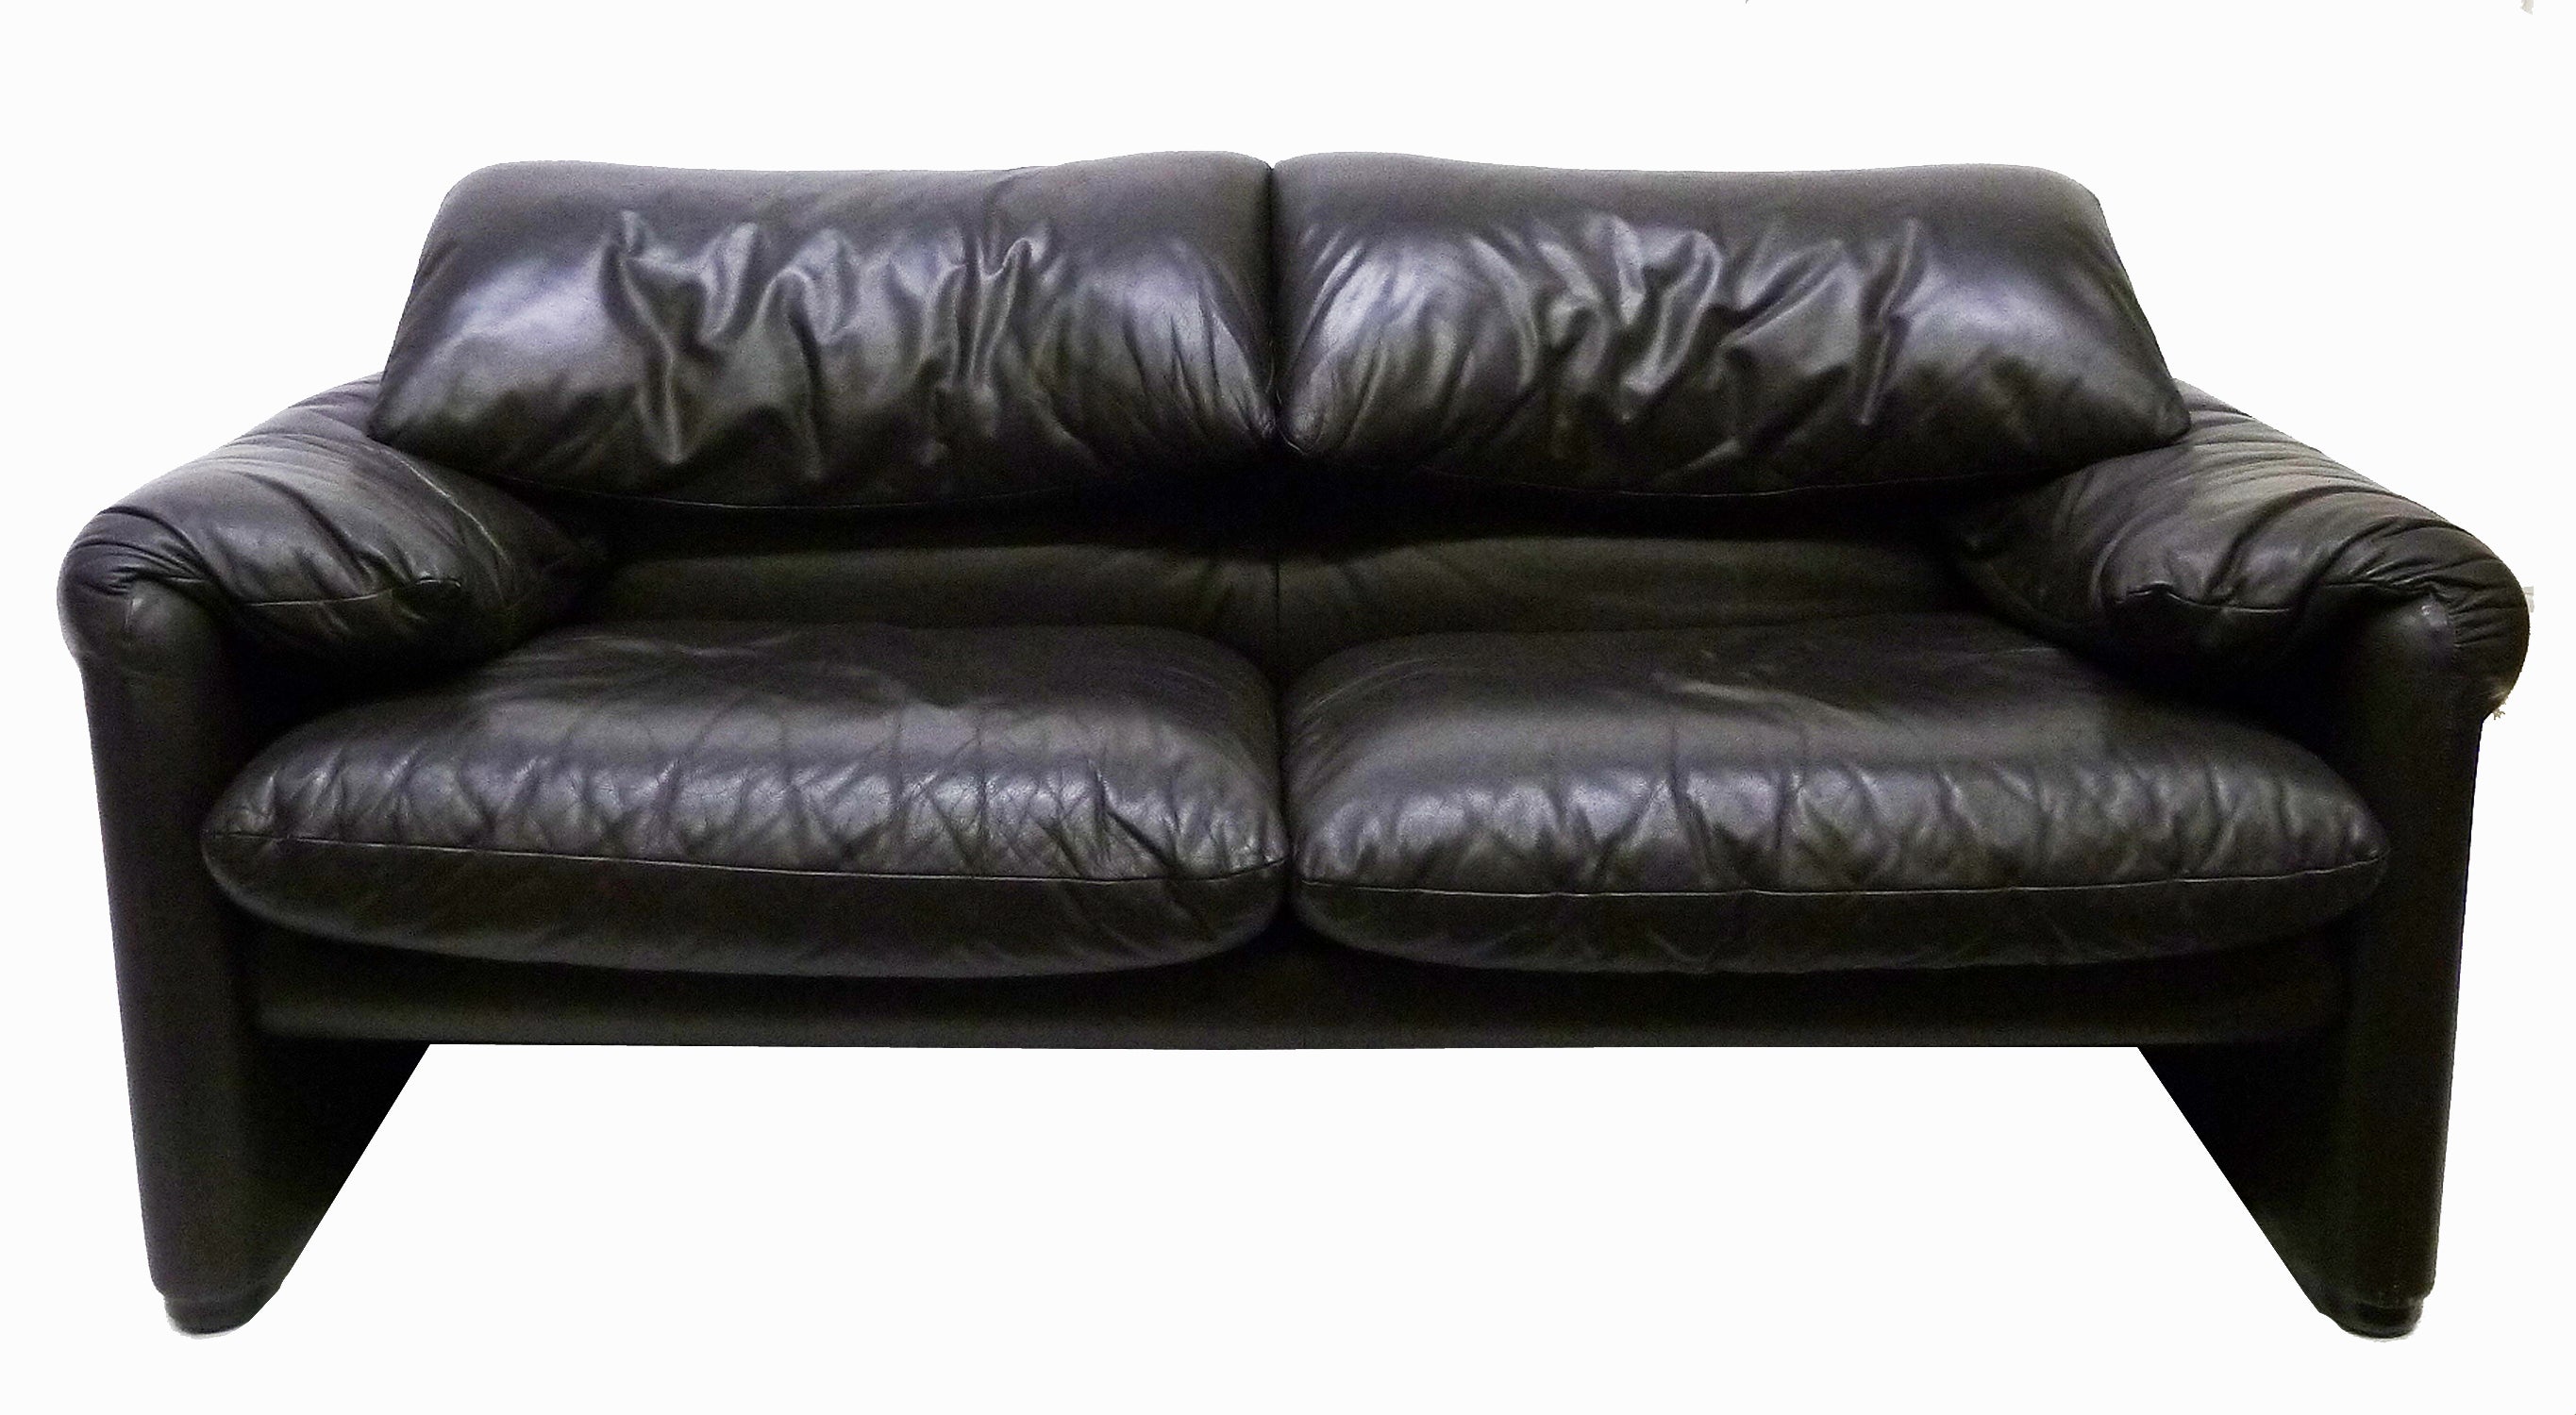 Adjustable Leather "Maralunga" Loveseat by Vico Magistretti for Cassina